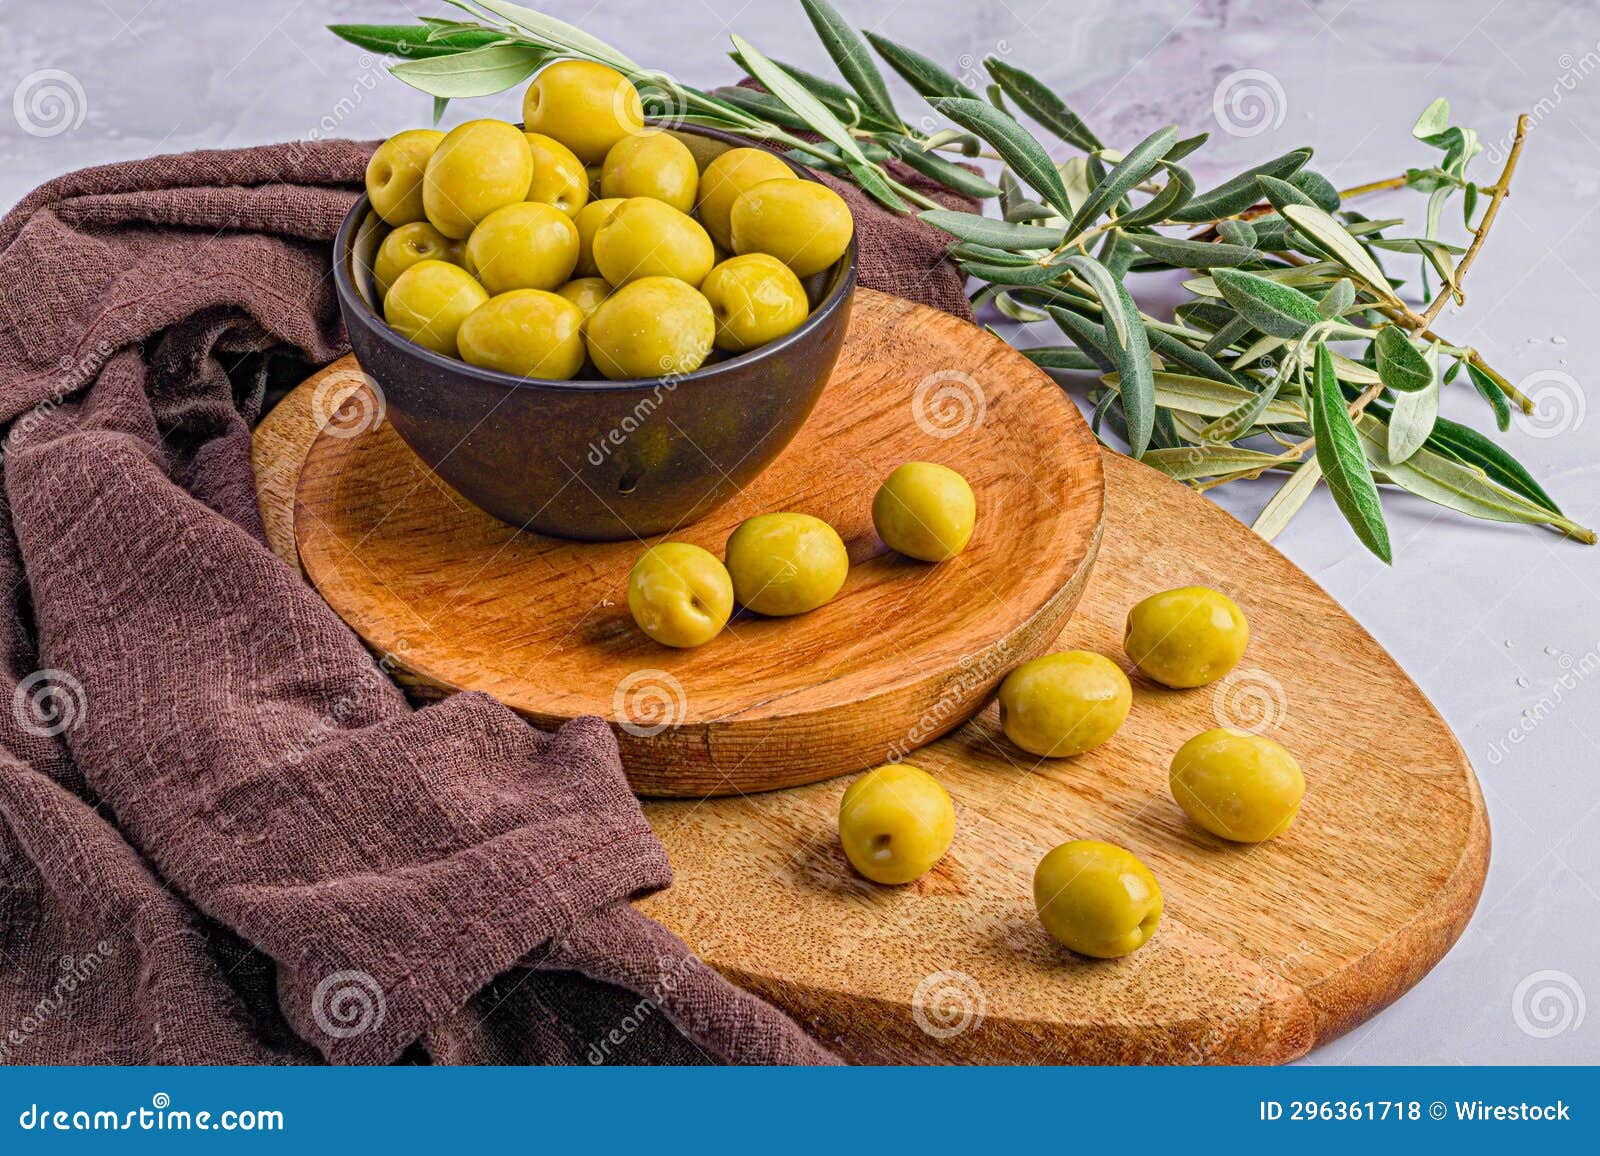 wooden board with an array of ripe green manzanilla olives and other decorations